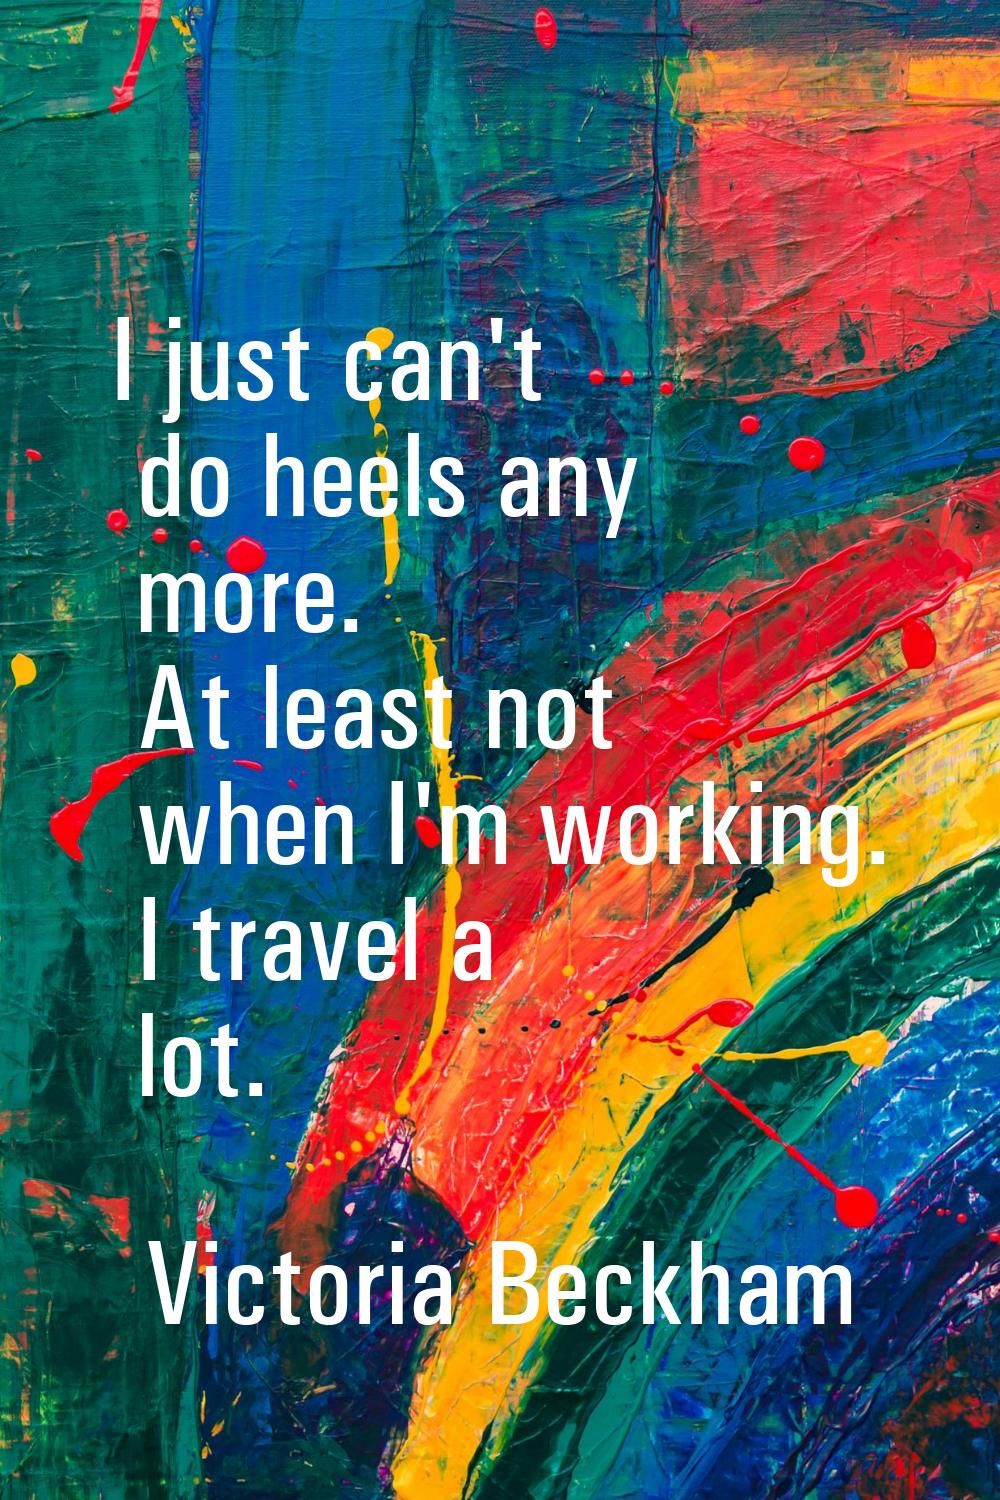 I just can't do heels any more. At least not when I'm working. I travel a lot.